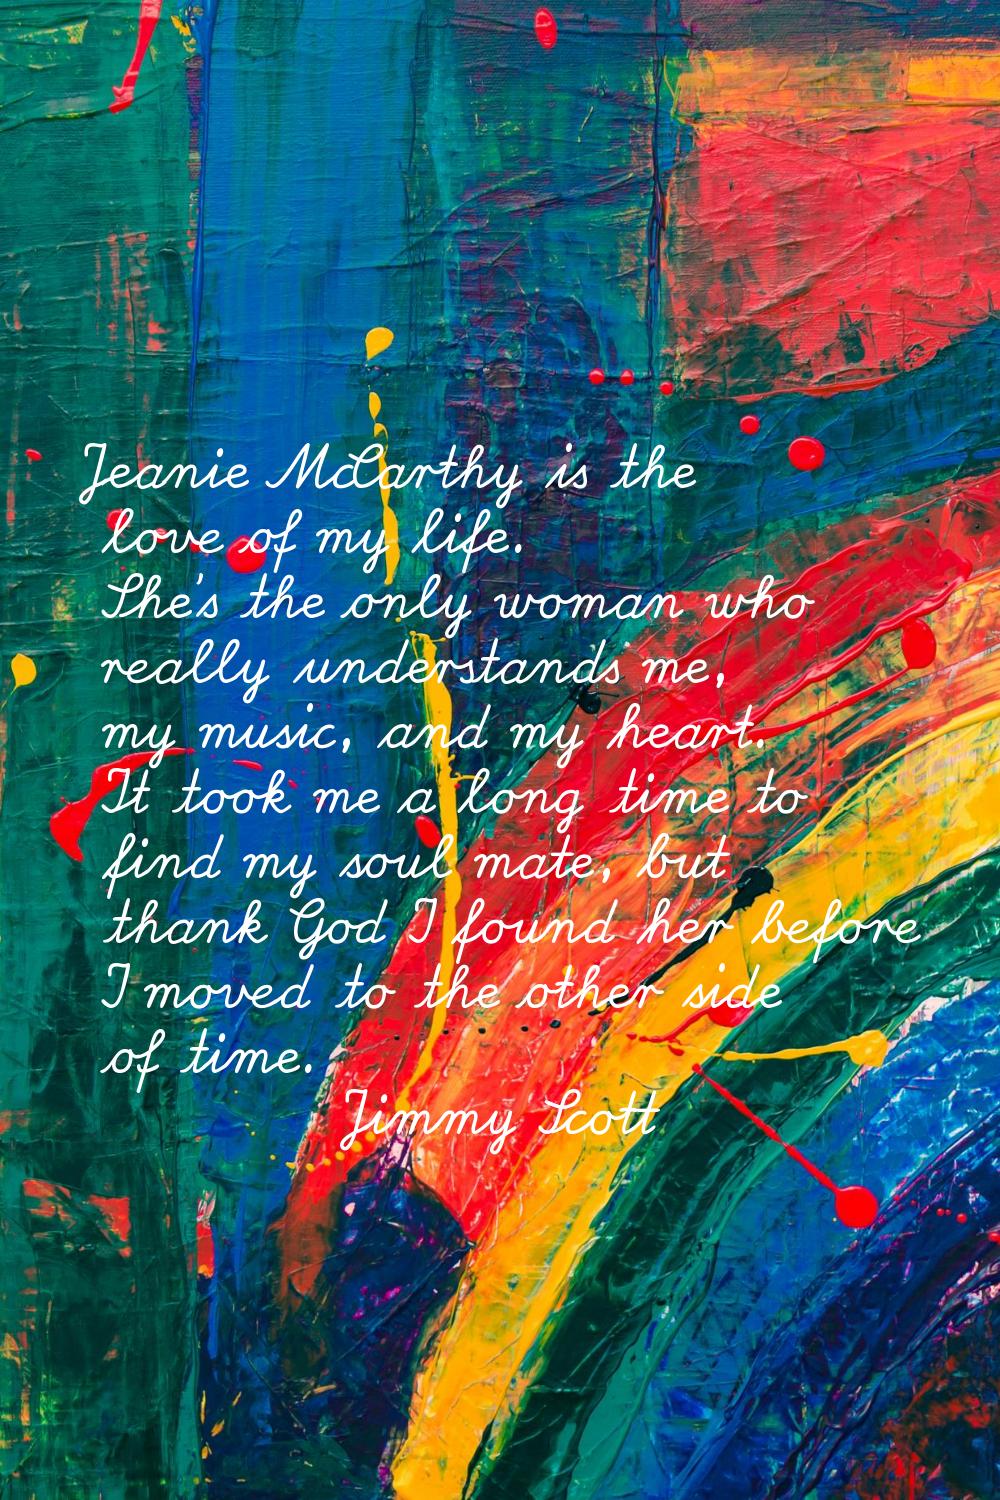 Jeanie McCarthy is the love of my life. She's the only woman who really understands me, my music, a